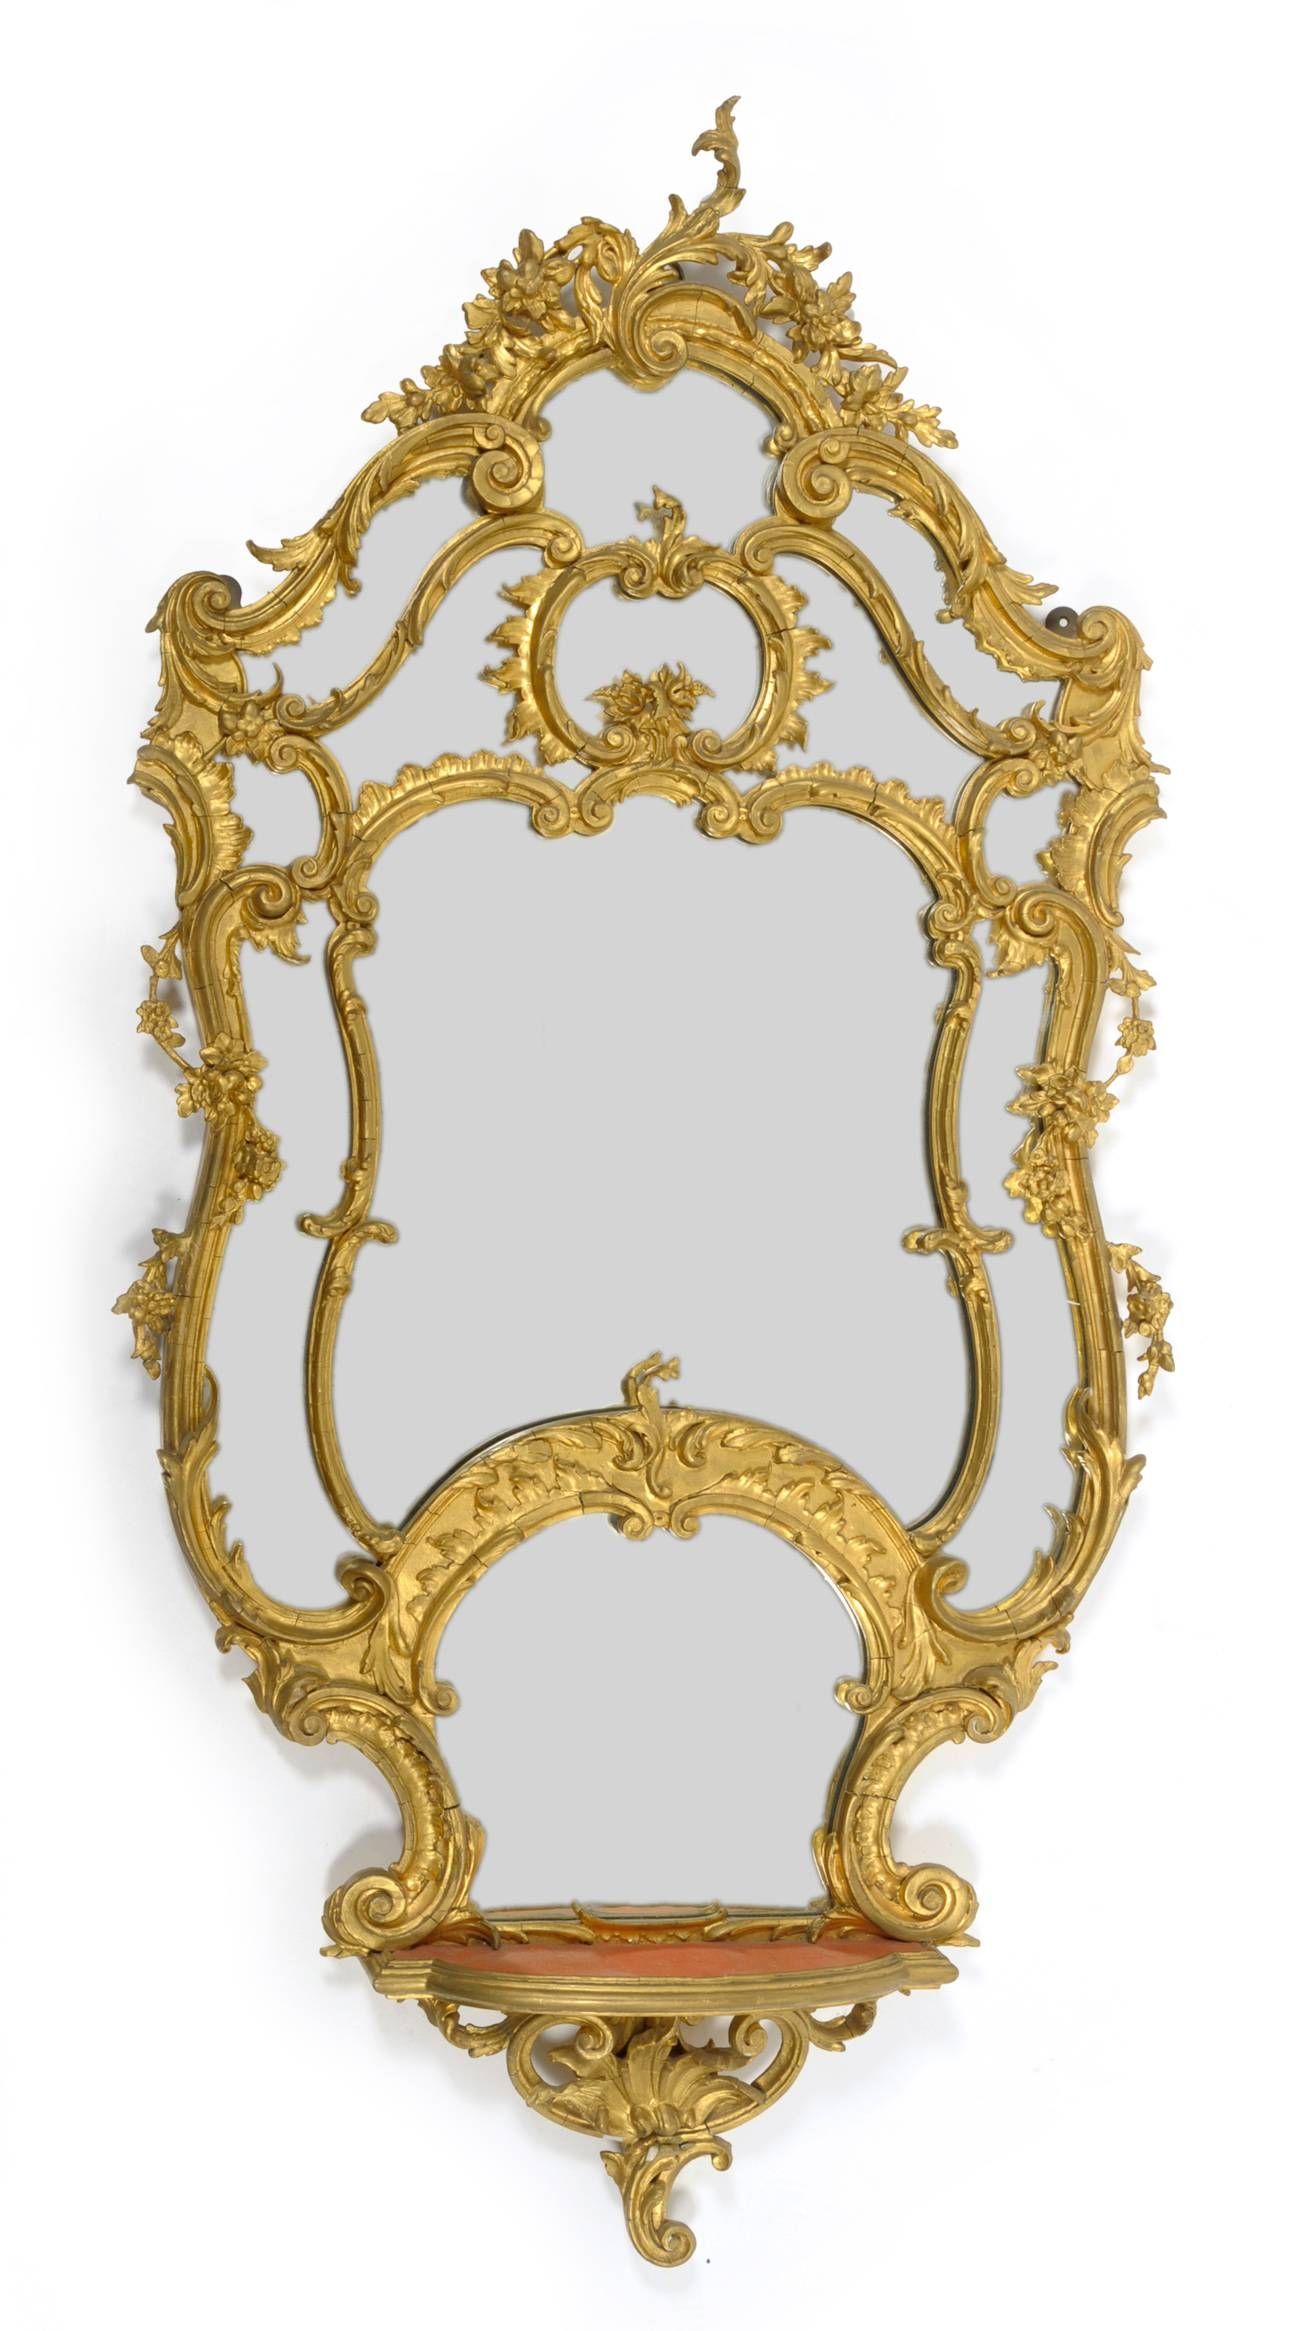 Tennants Auctioneers: An 18th Century Style Rococo Gilt Gesso Wall Intended For Rococo Wall Mirrors (View 12 of 15)